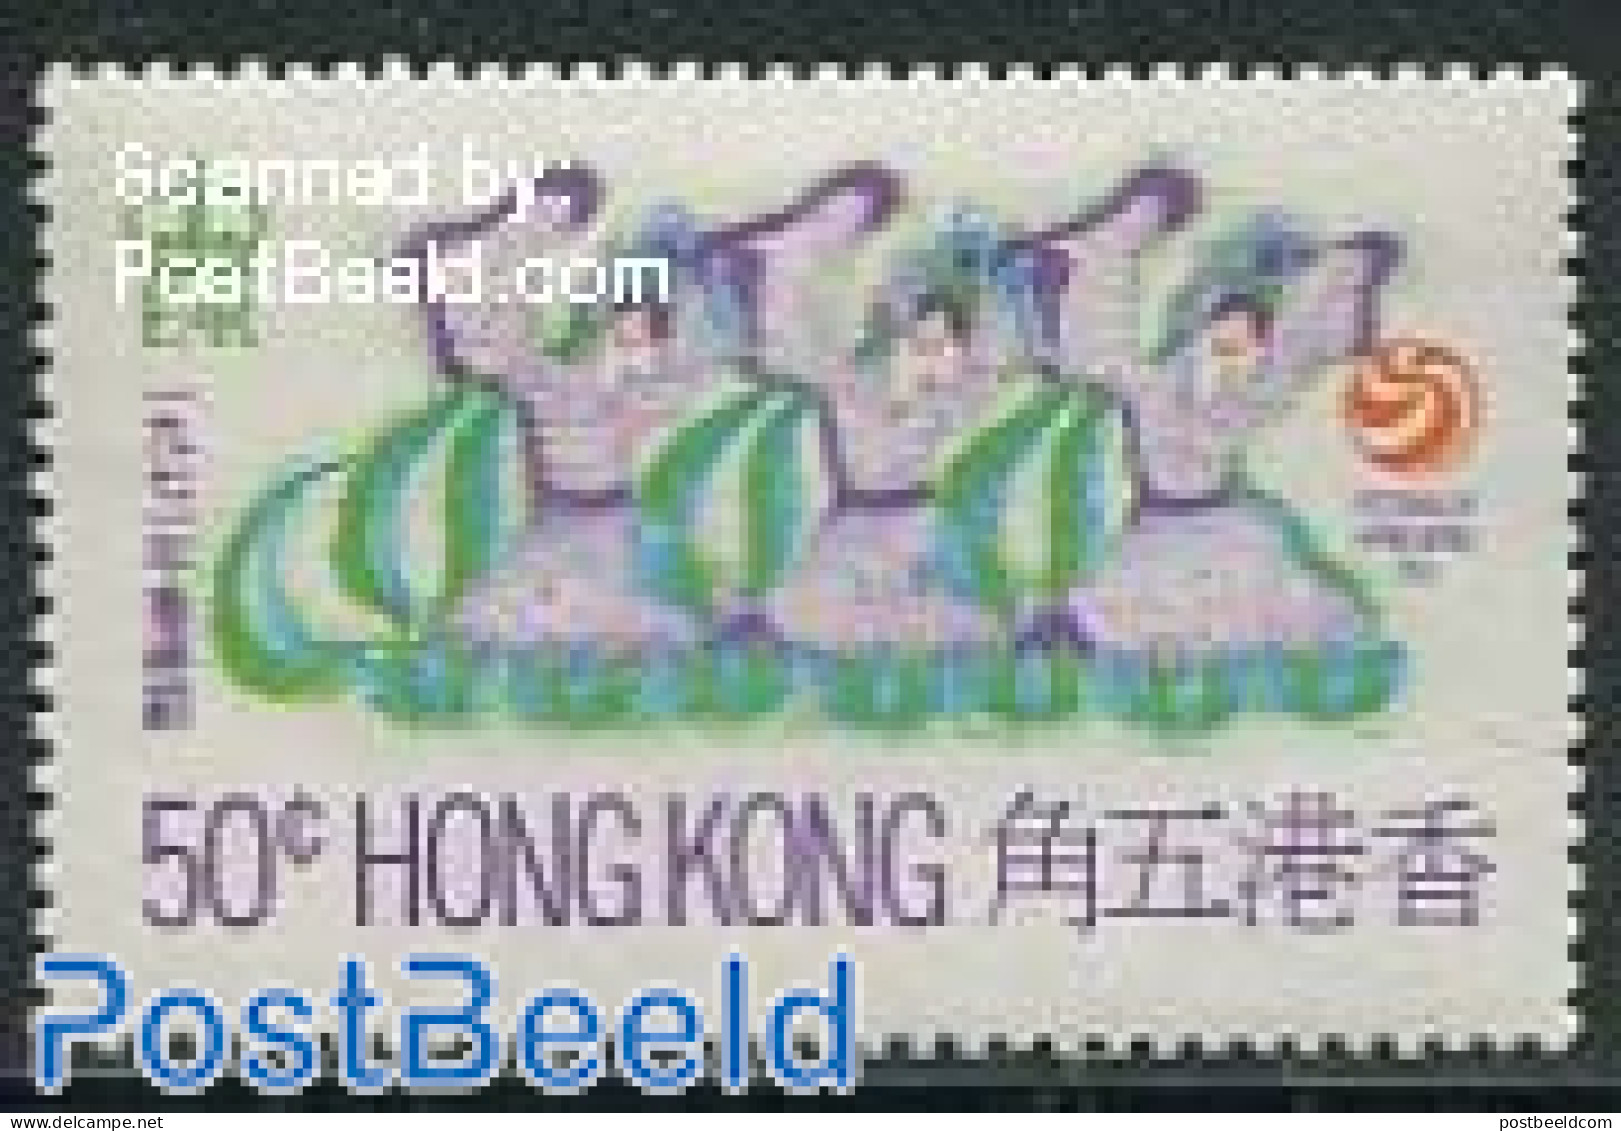 Hong Kong 1971 50c, Stamp Out Of Set, Mint NH - Unused Stamps